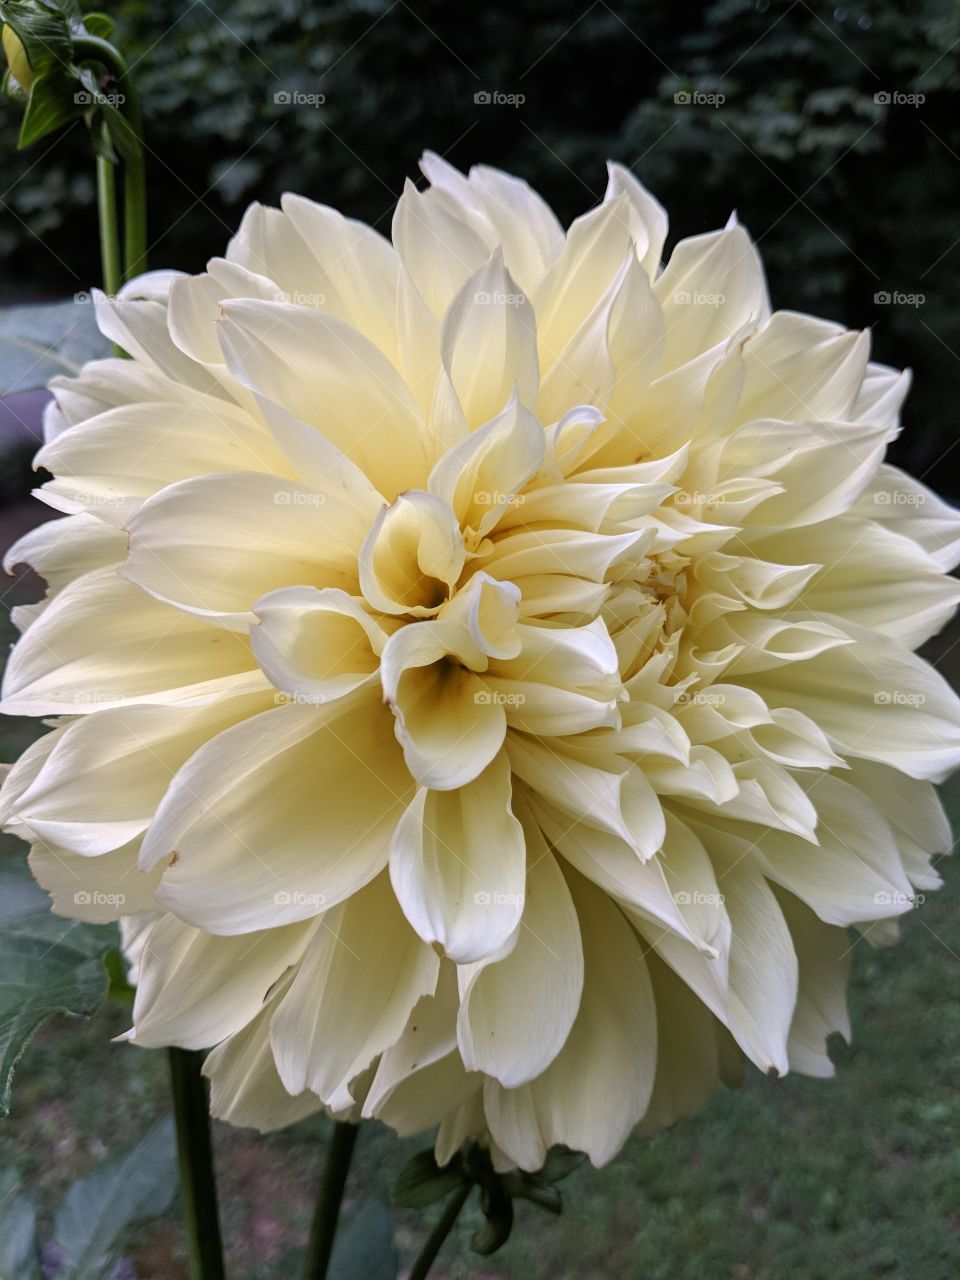 An absolutely massive flower taken in my grandmother's garden. Anyone who is a firm believer that big is beautiful, this one is definitely for you!